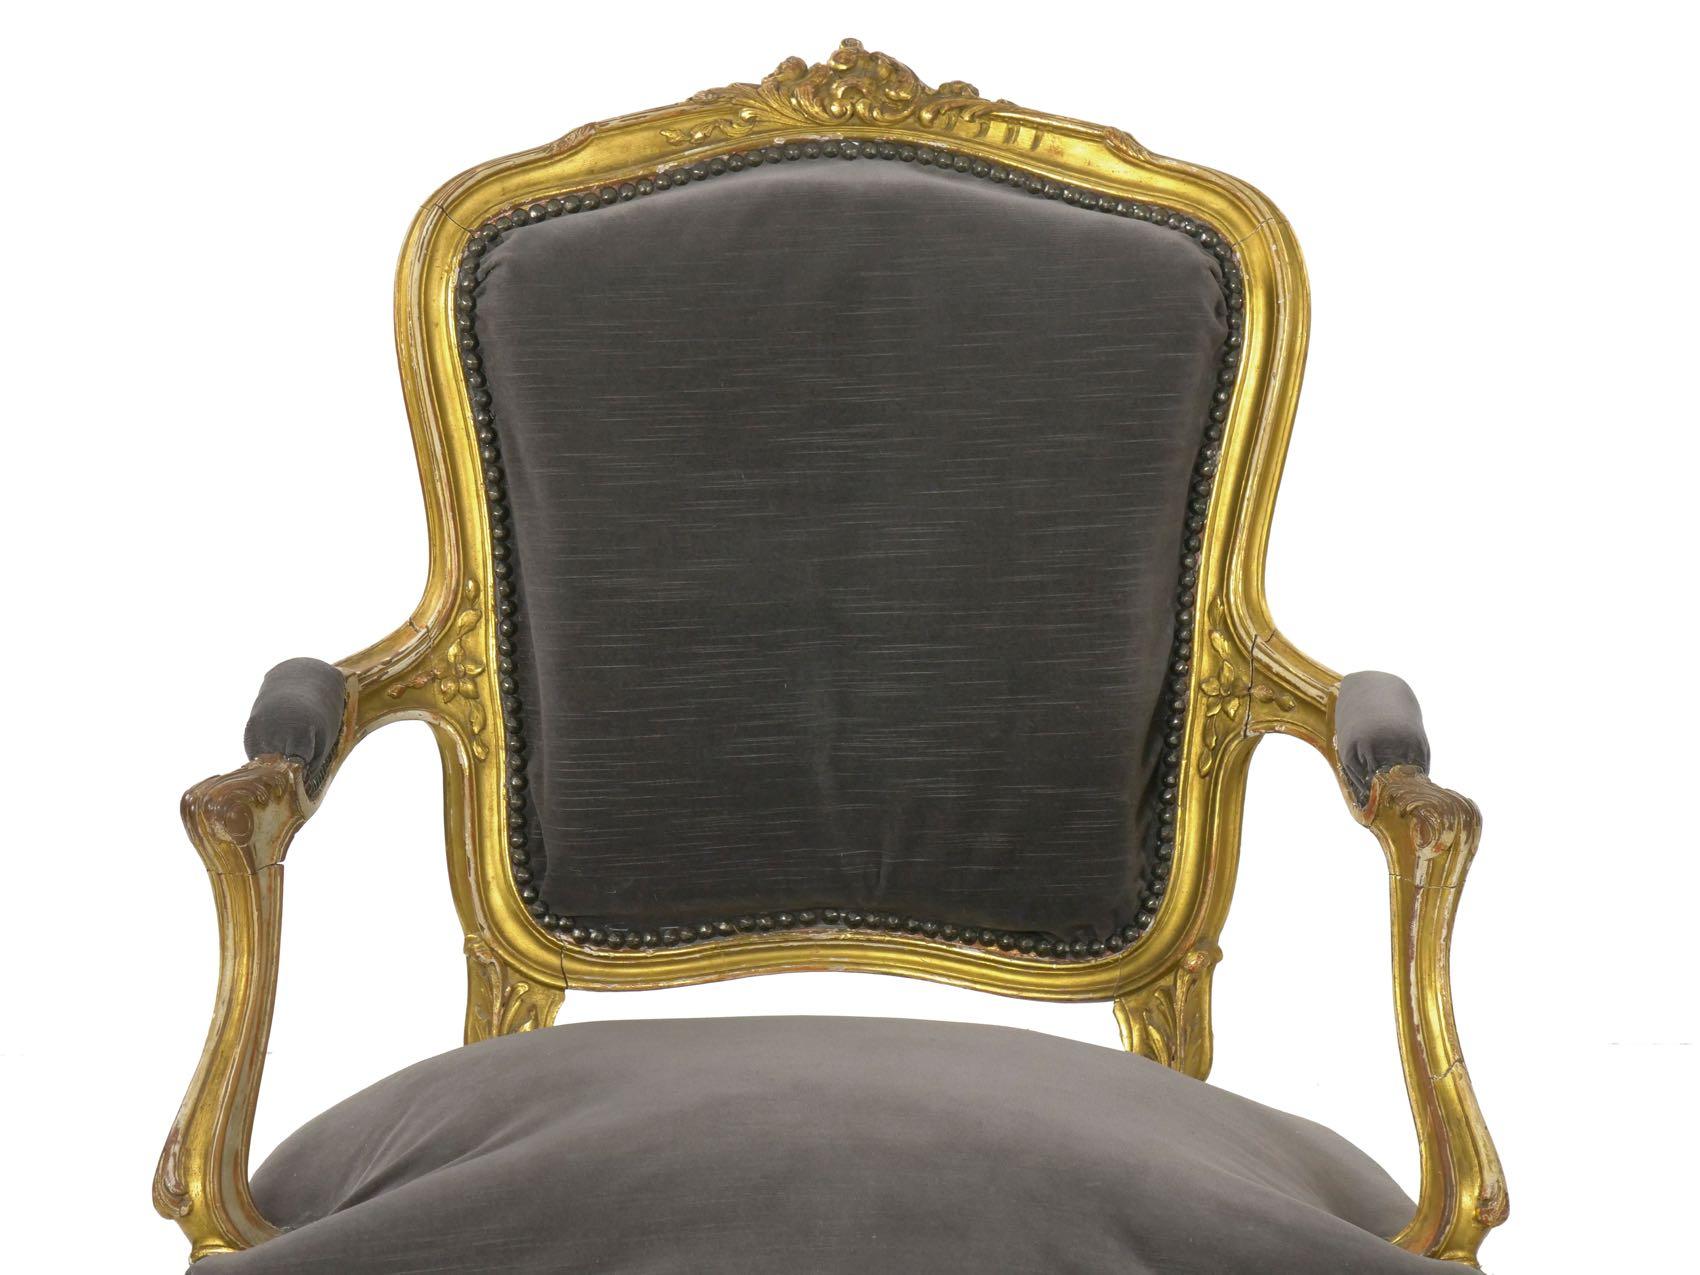 This striking pair of Louis XV style fauteuils retain an original and rather early gilding naturally worn down to the gesso in some areas over a vibrant carved surface. The chairs exhibit a skilled carver’s hand, the displays mostly of acanthus and